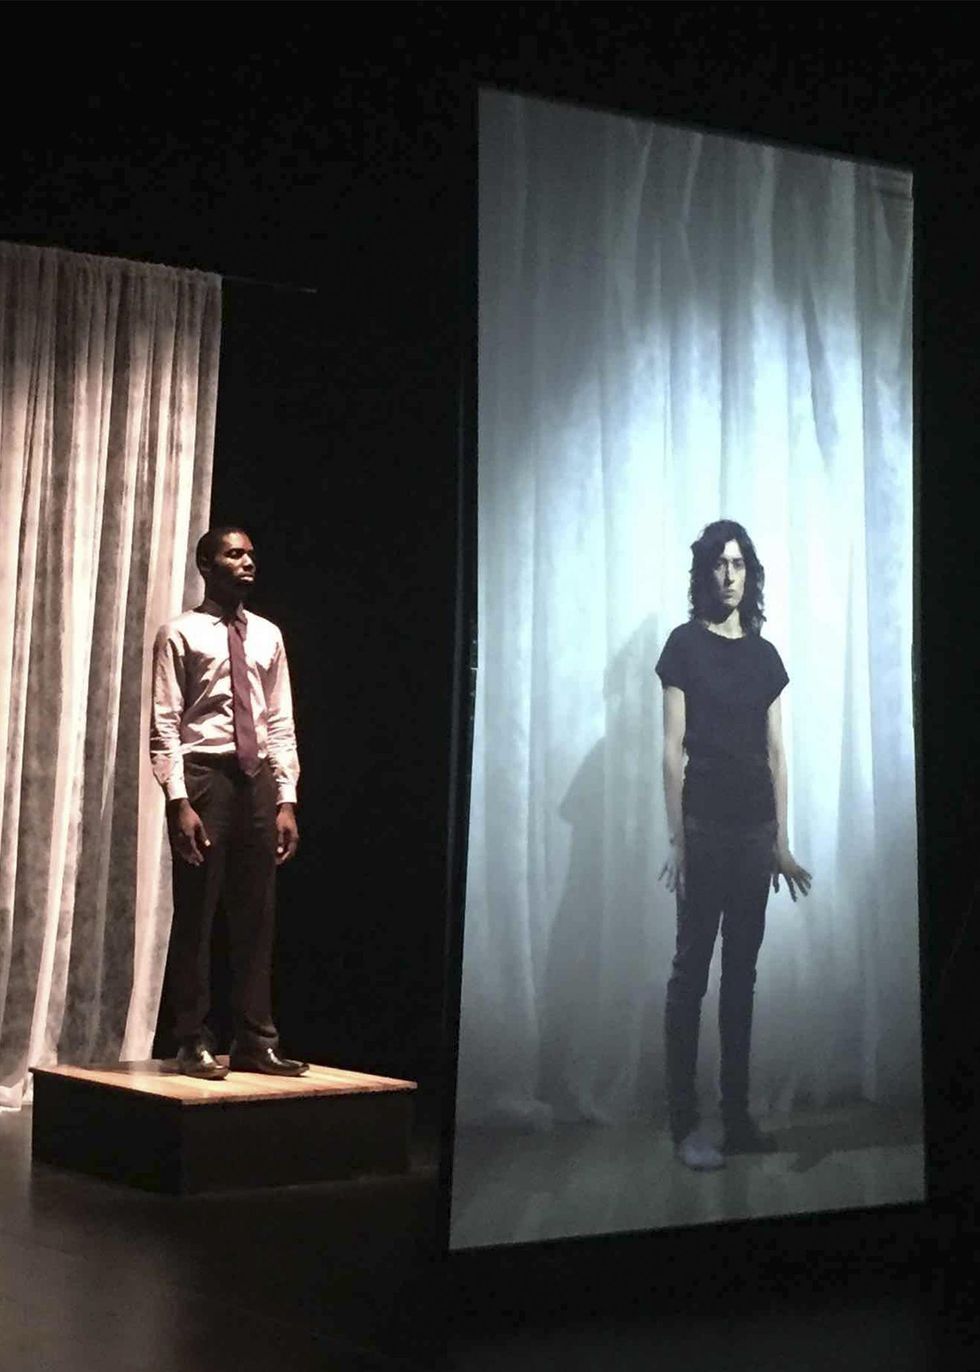 A man in a suit and tie, minus the jacket, stands on a foot-high platform, arms by his sides. He watches the life-size image of a dancer projected onto a screen in front of him. The dancer also stands in a neutral position, arms by their sides, but their fingers flare out to the sides as they look at the camera.